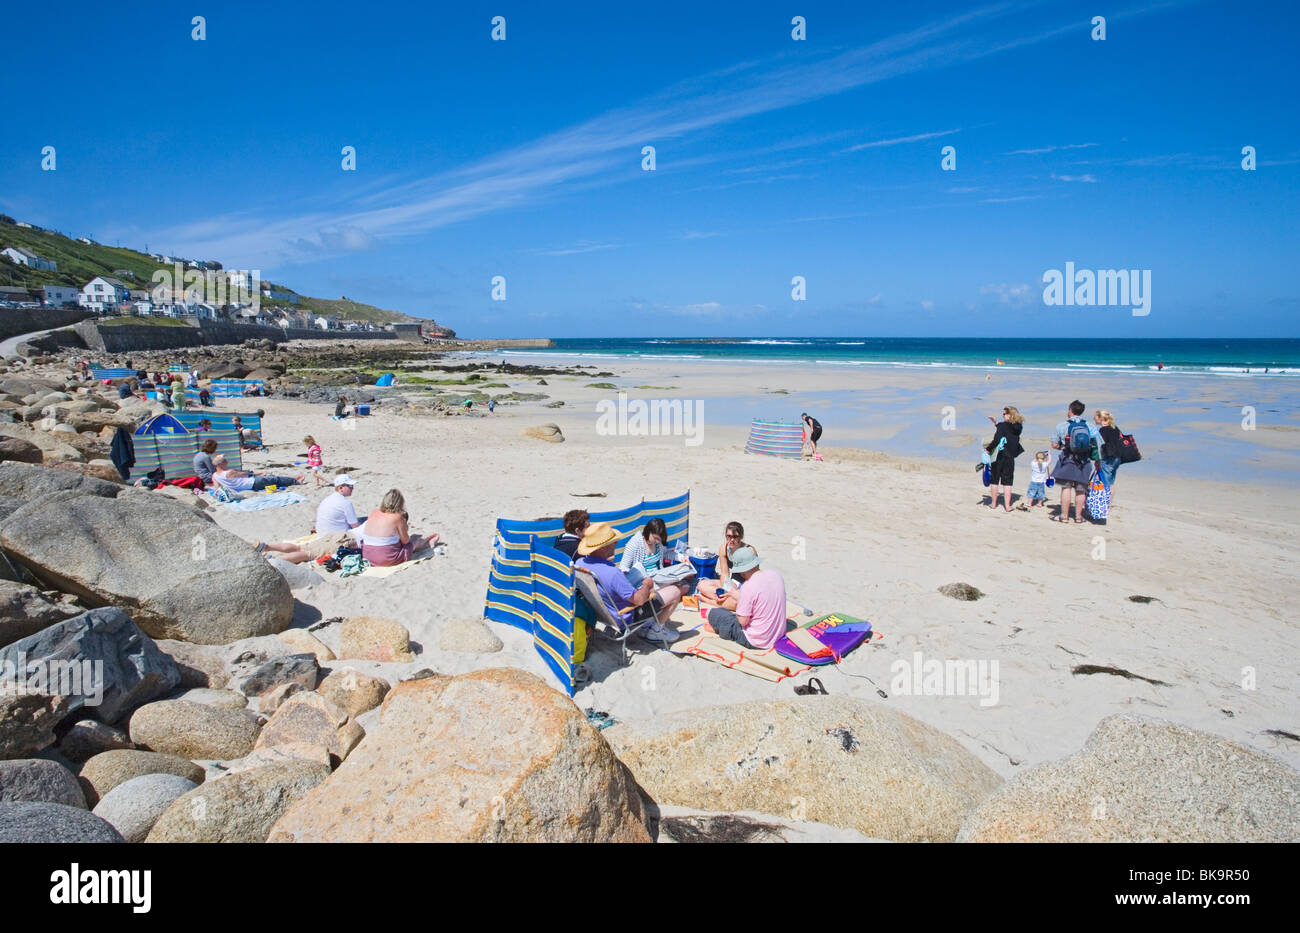 People relaxing at Sennen Cove, Penwith peninsula, Cornwall, England, United Kingdom Stock Photo